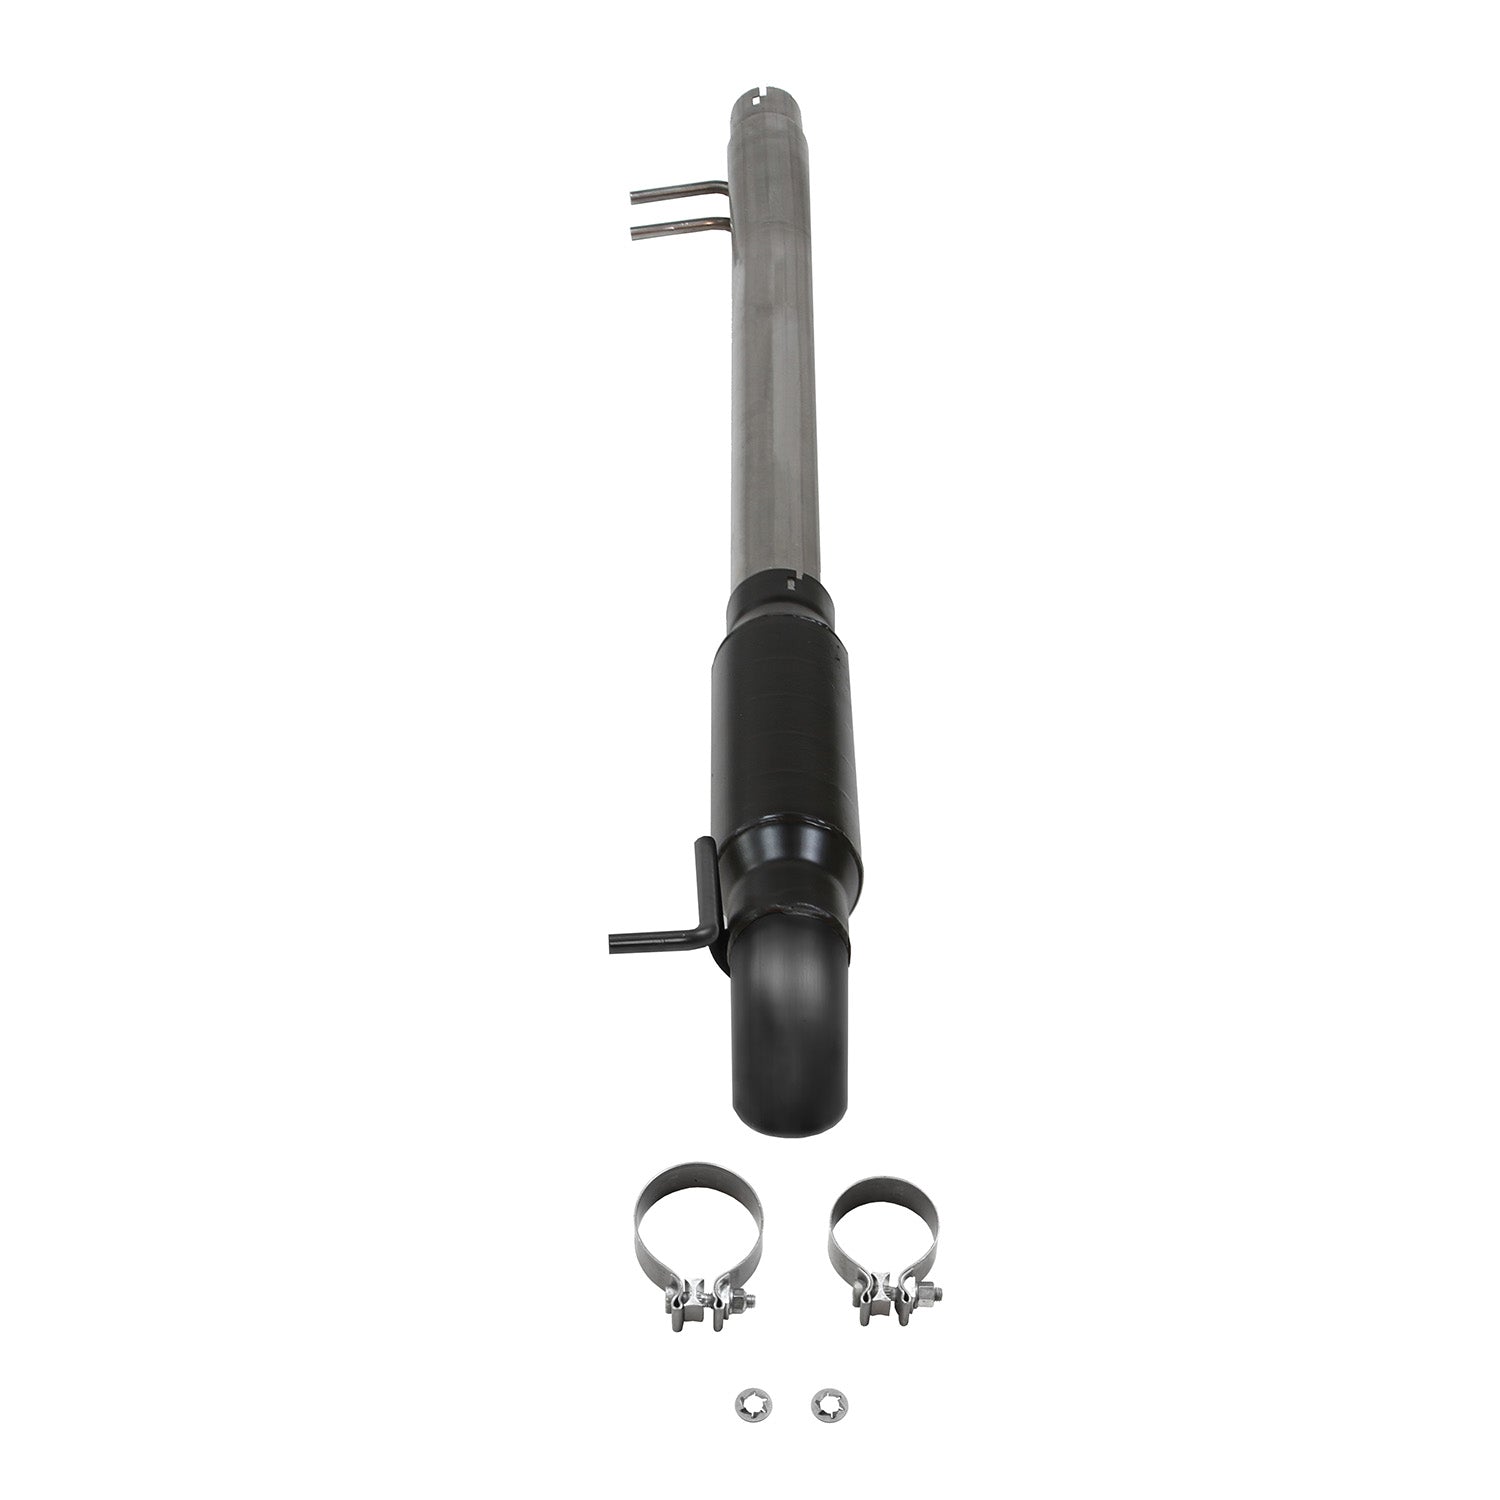 Flowmaster Jeep (3.6, 3.8) Exhaust System Kit 818110